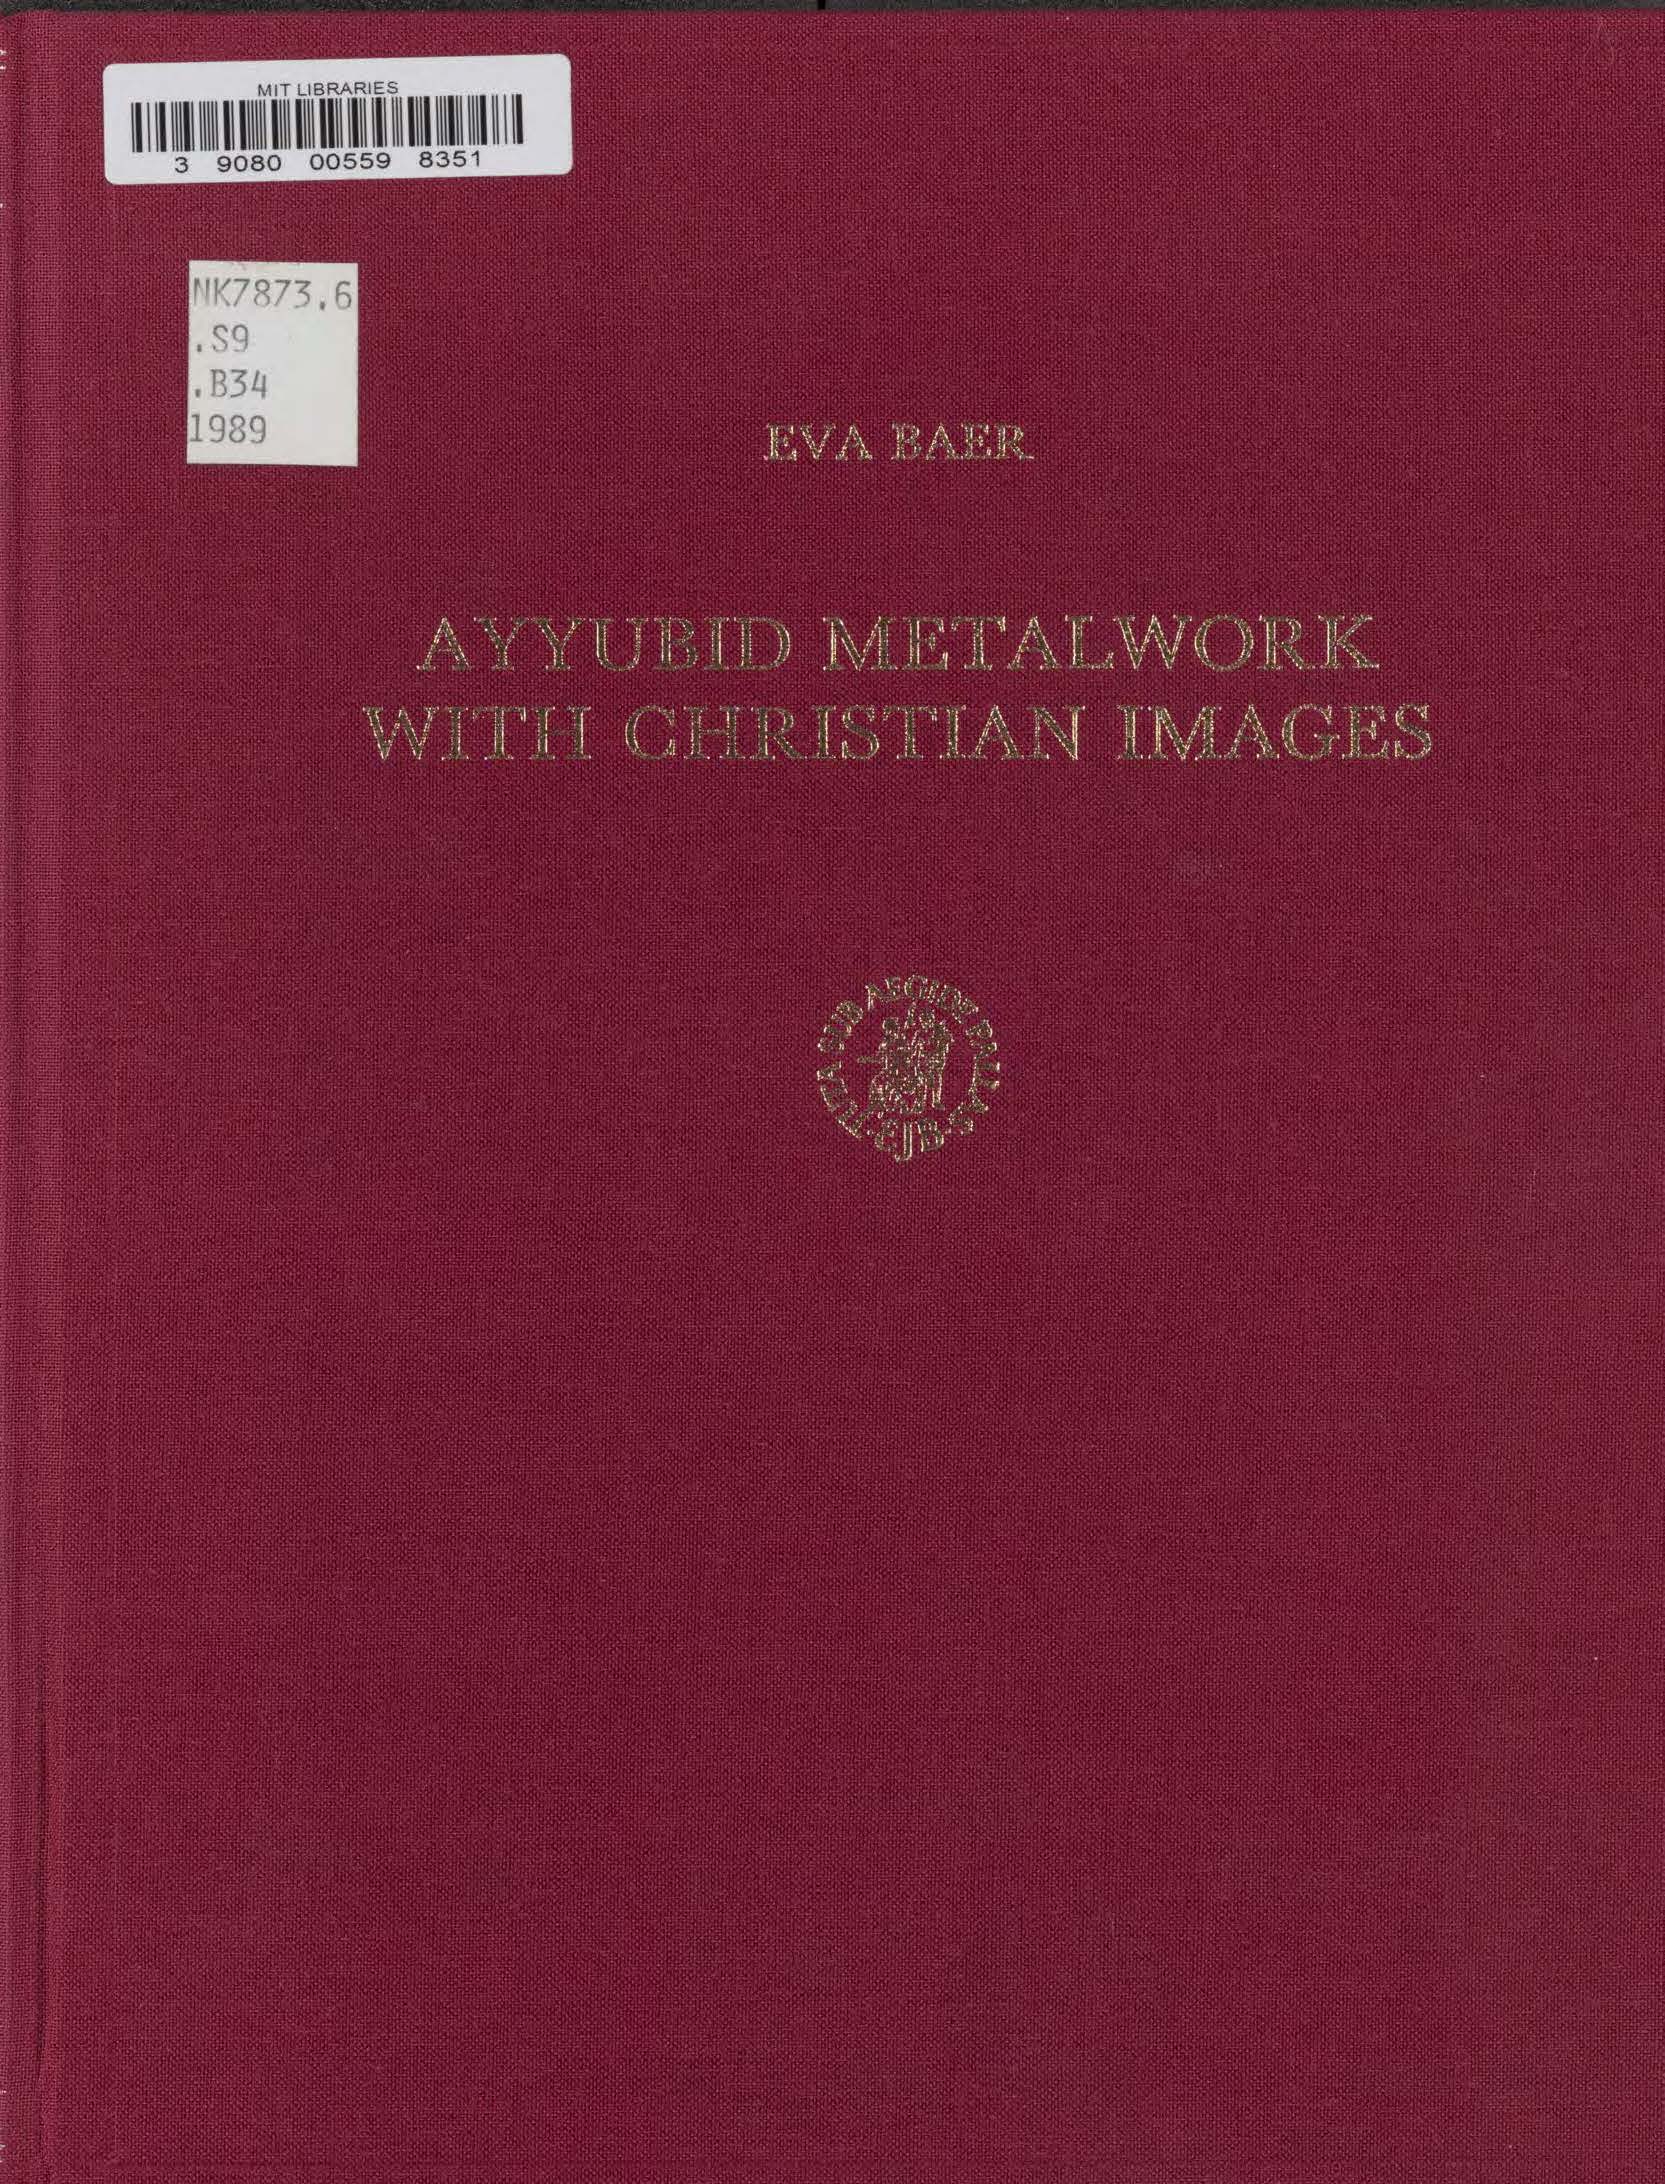 Eva Baer - Study of luxury metal artifacts with Christian imagery from the Ayyubid period (12th and 13th/6th and 7th c. AH).<br>